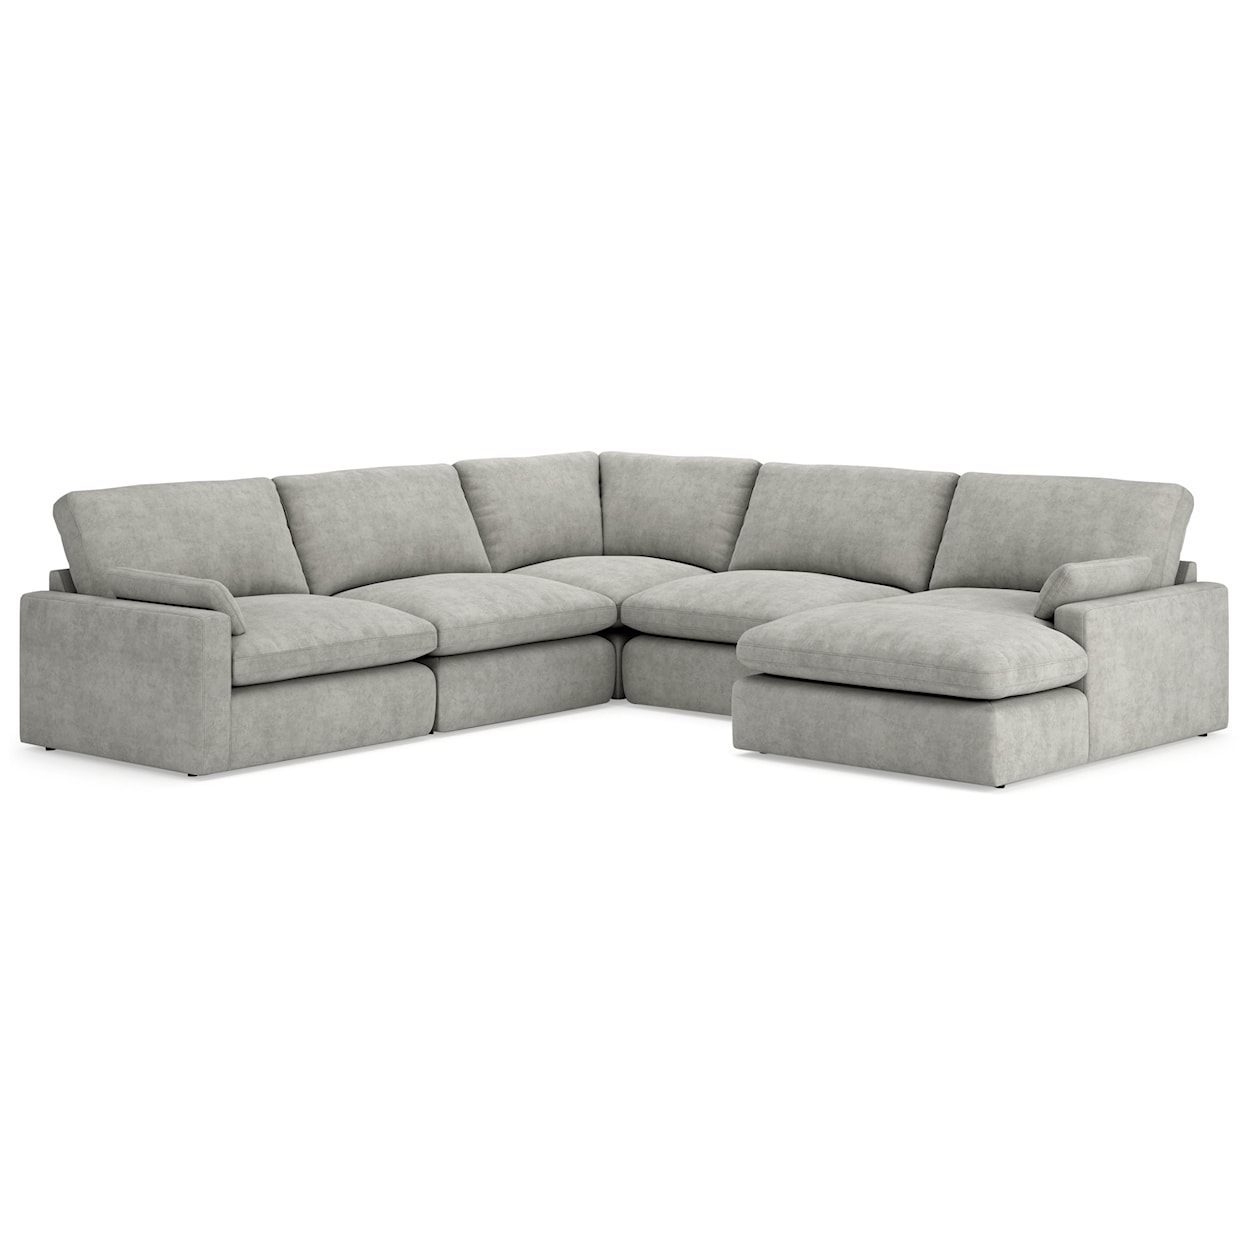 StyleLine Sophie 5-Piece Sectional with Chaise